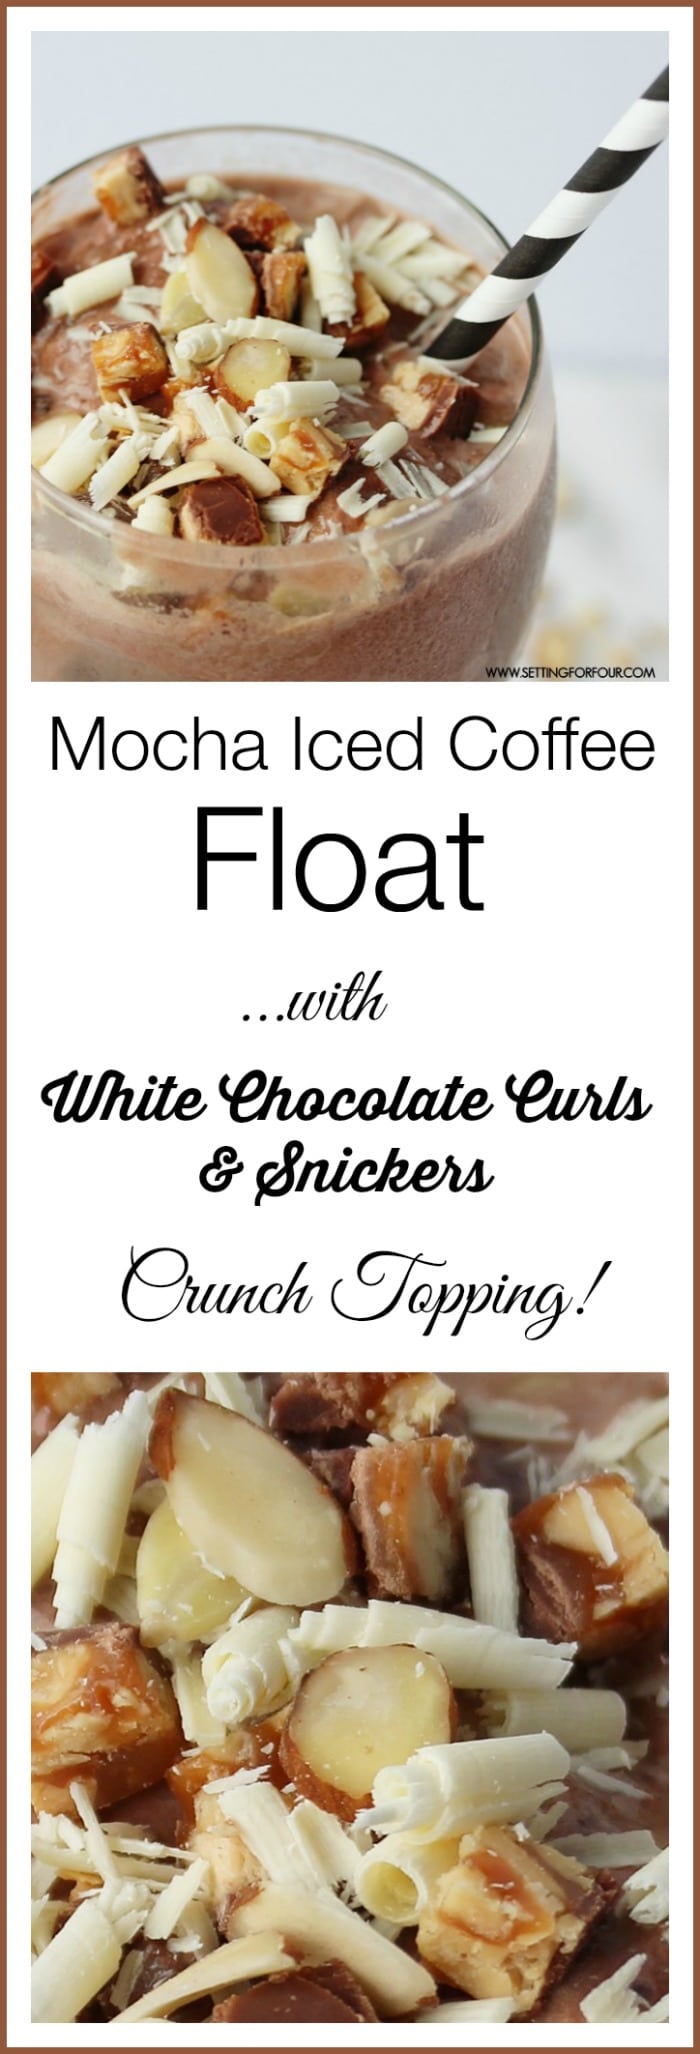 Mocha Iced Coffee Ice Cream Float with White Chocolate Curls and Snickers Crunch Topping.